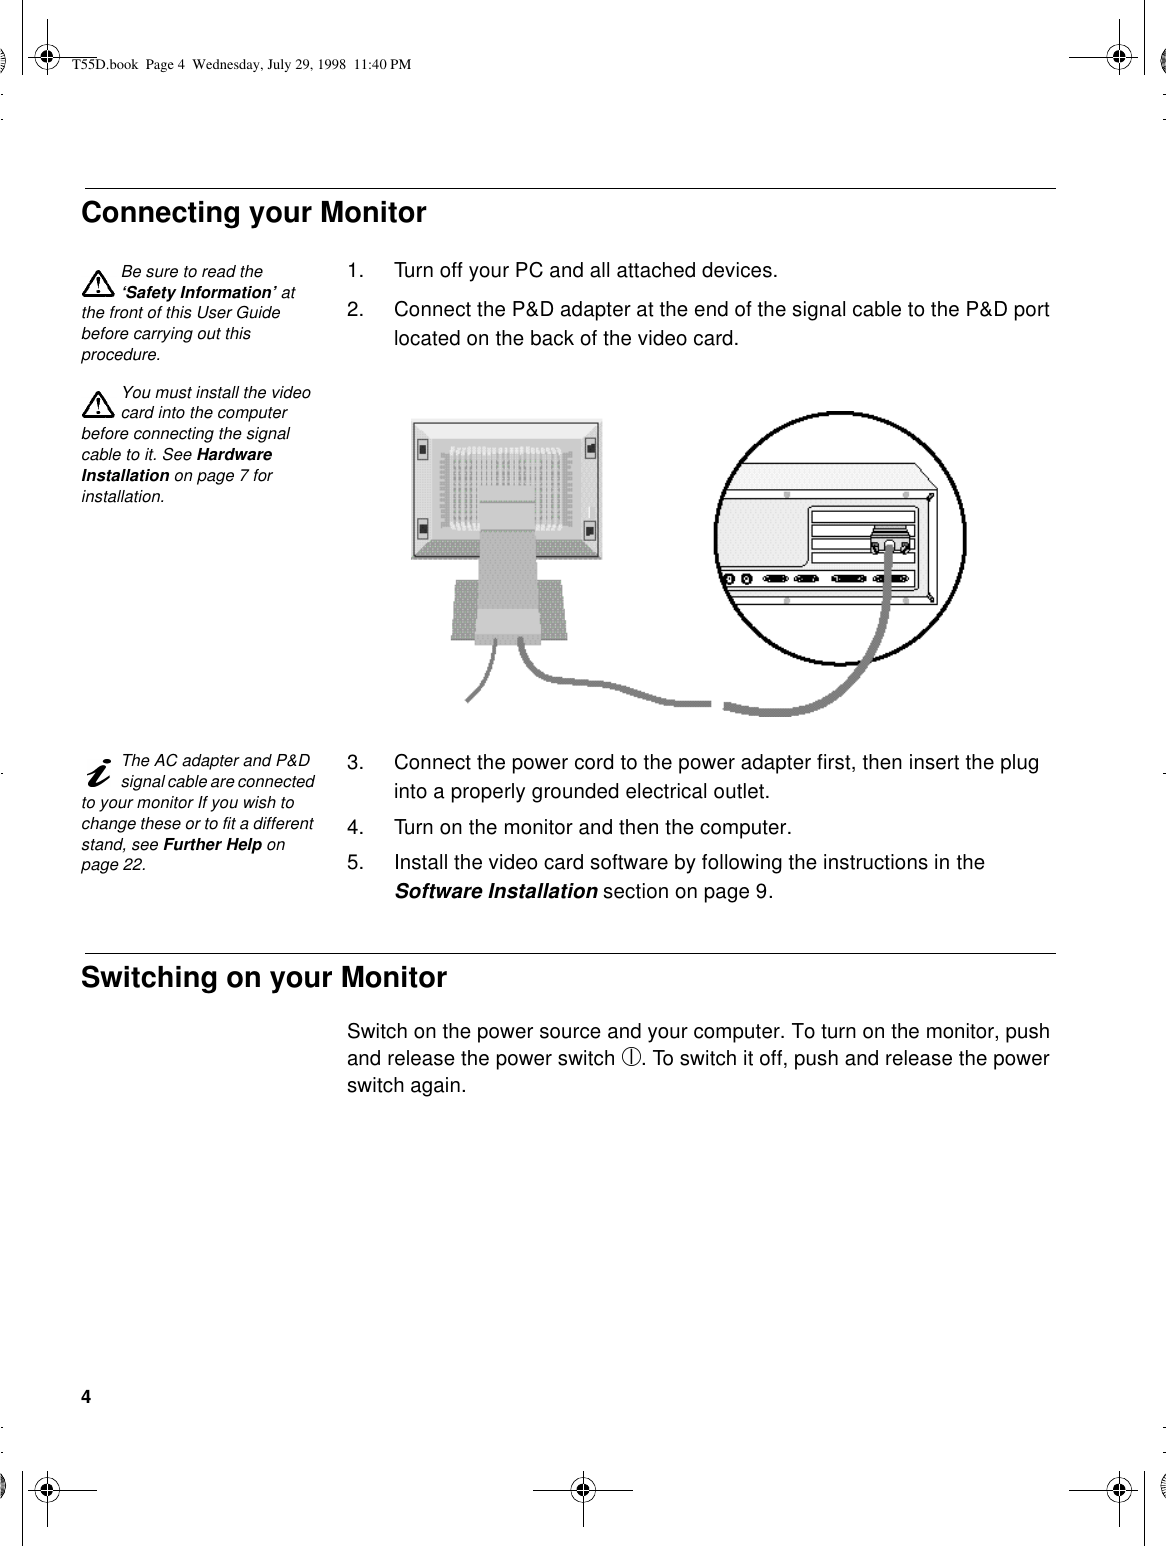 4Connecting your MonitorBe sure to read the ‘Safety Information’ at the front of this User Guide before carrying out this procedure.1. Turn off your PC and all attached devices.2. Connect the P&amp;D adapter at the end of the signal cable to the P&amp;D port located on the back of the video card.You must install the video card into the computer before connecting the signal cable to it. See Hardware Installation on page 7 for installation.The AC adapter and P&amp;D signal cable are connected to your monitor If you wish to change these or to fit a different stand, see Further Help on page 22.3. Connect the power cord to the power adapter first, then insert the plug into a properly grounded electrical outlet.4. Turn on the monitor and then the computer.5. Install the video card software by following the instructions in the Software Installation section on page 9.Switching on your MonitorSwitch on the power source and your computer. To turn on the monitor, push and release the power switch . To switch it off, push and release the power switch again.T55D.book  Page 4  Wednesday, July 29, 1998  11:40 PM